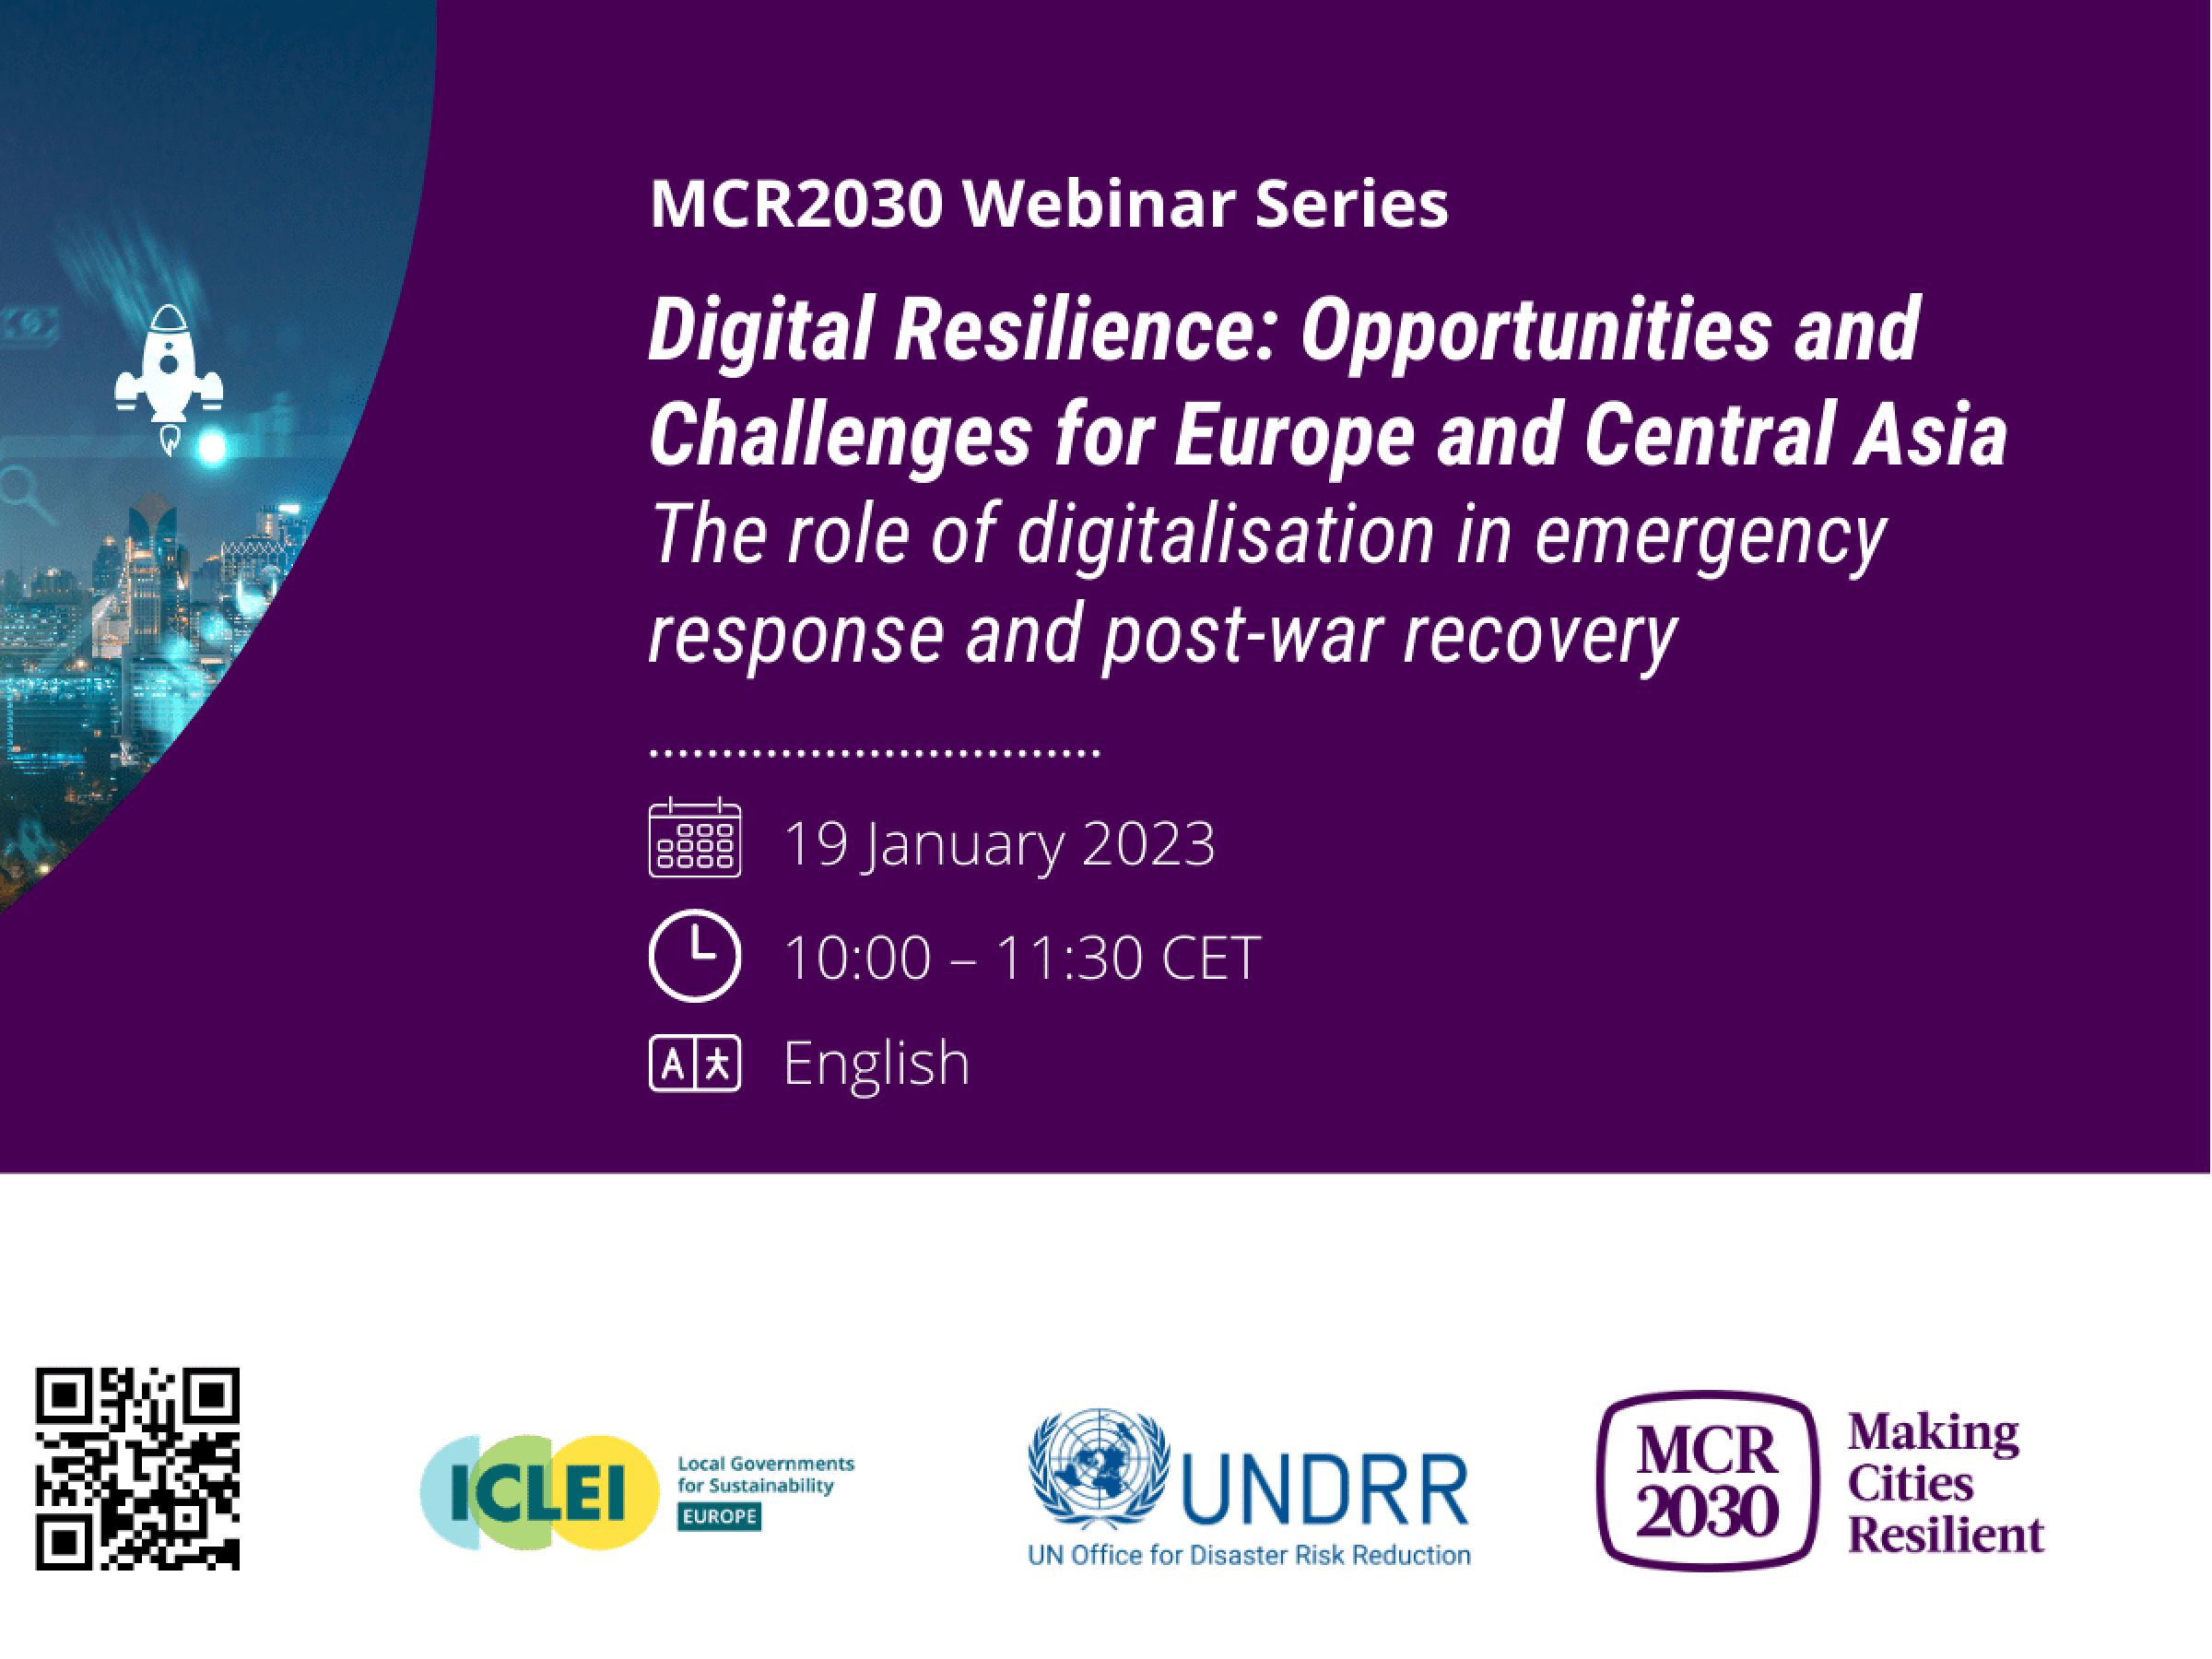 MCR2030 event flyer - the role of digitalization in emergency response and post-war recovery